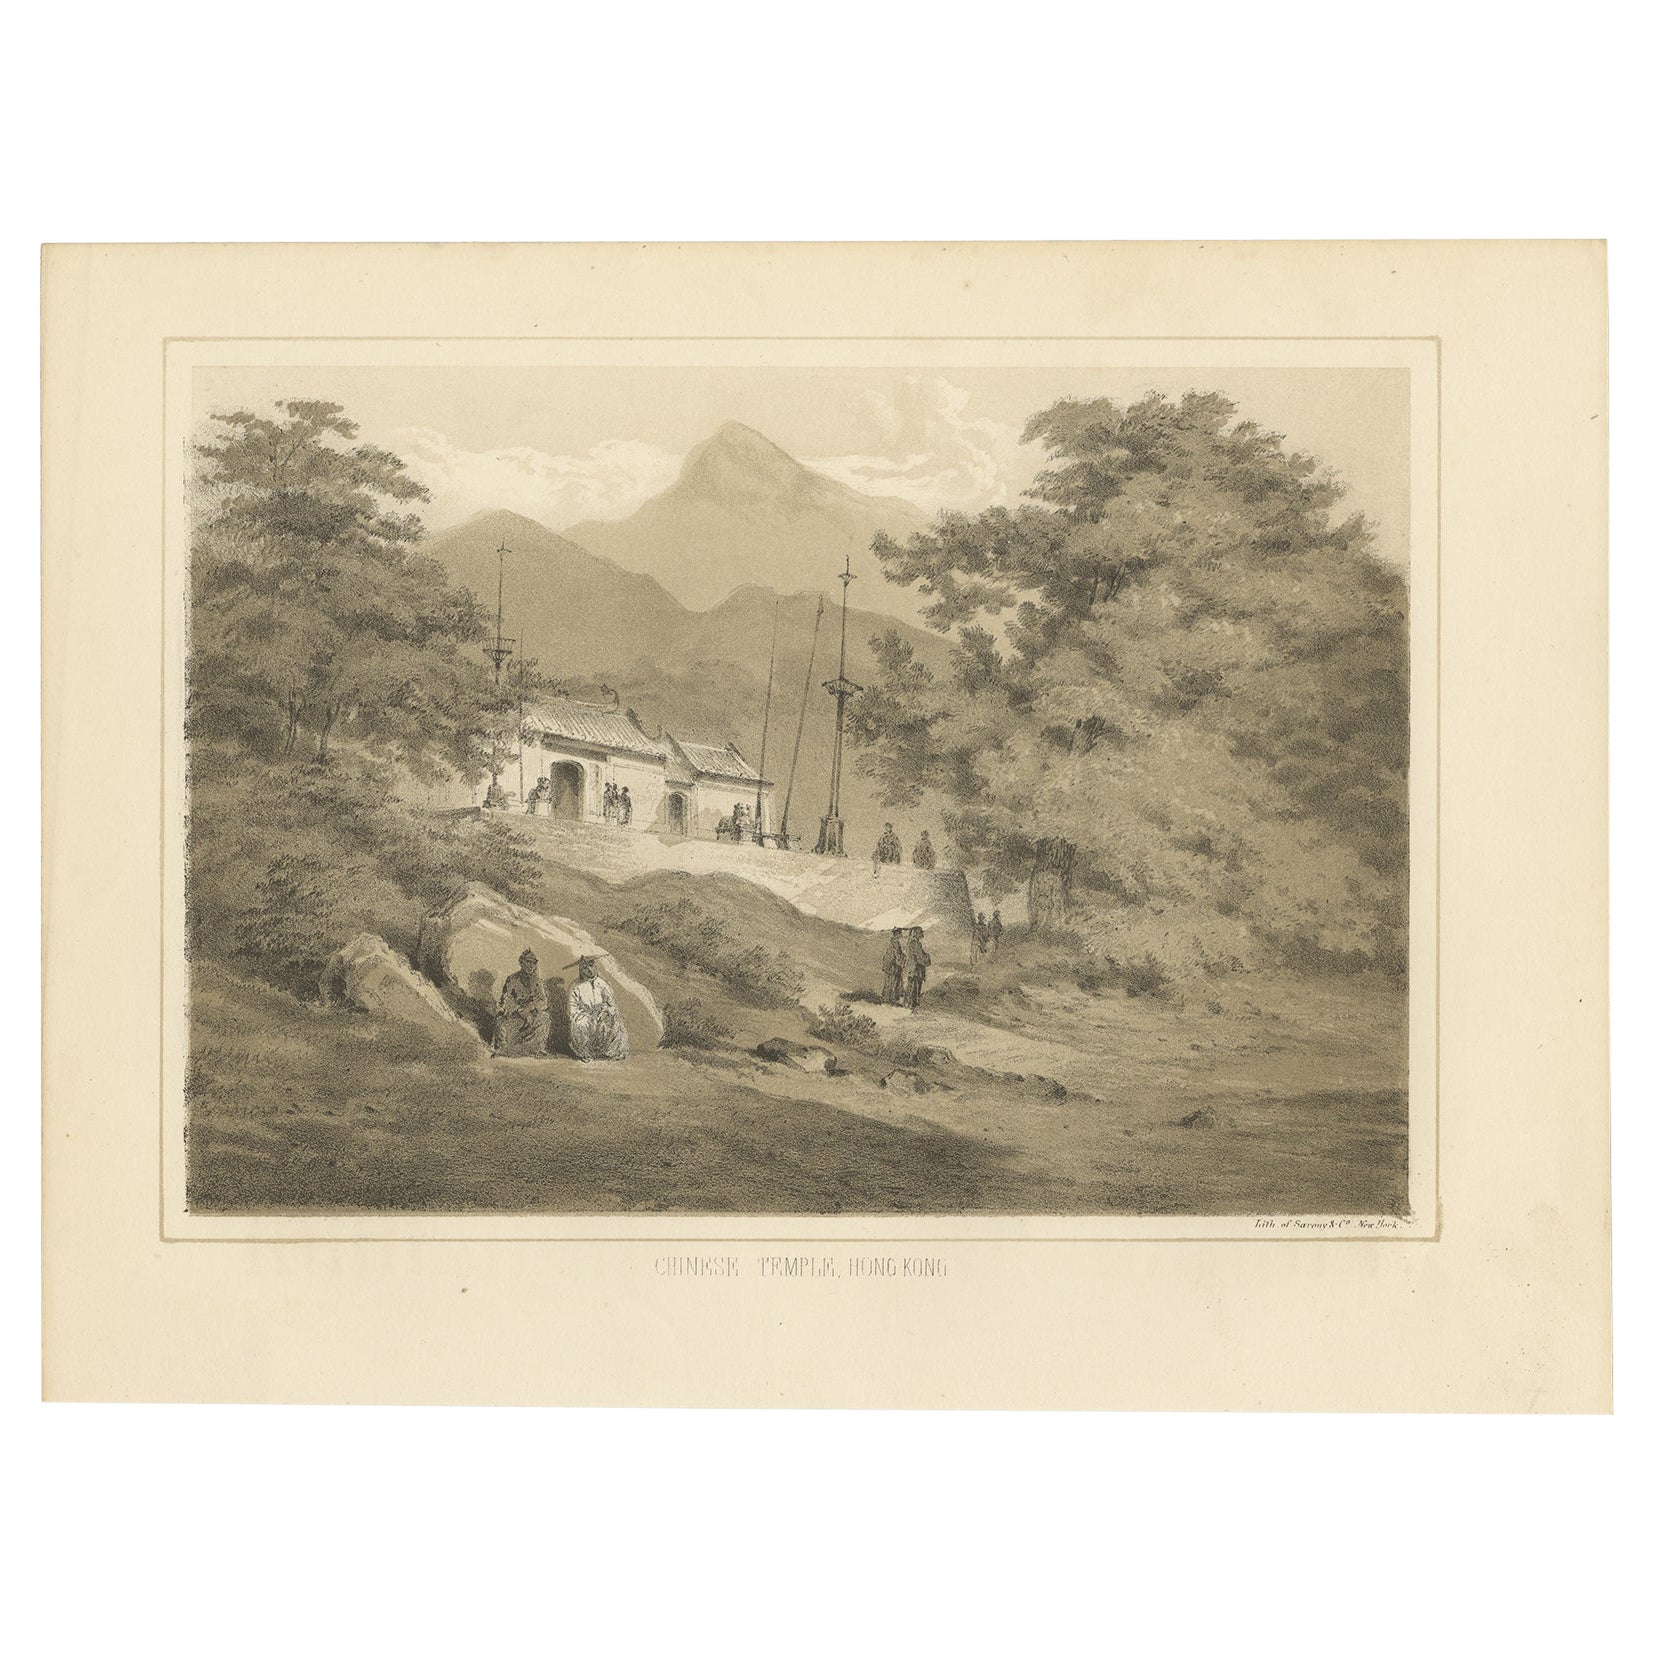 Antique Print Titled ‘Chinese Temple Hong-Kong', 1856